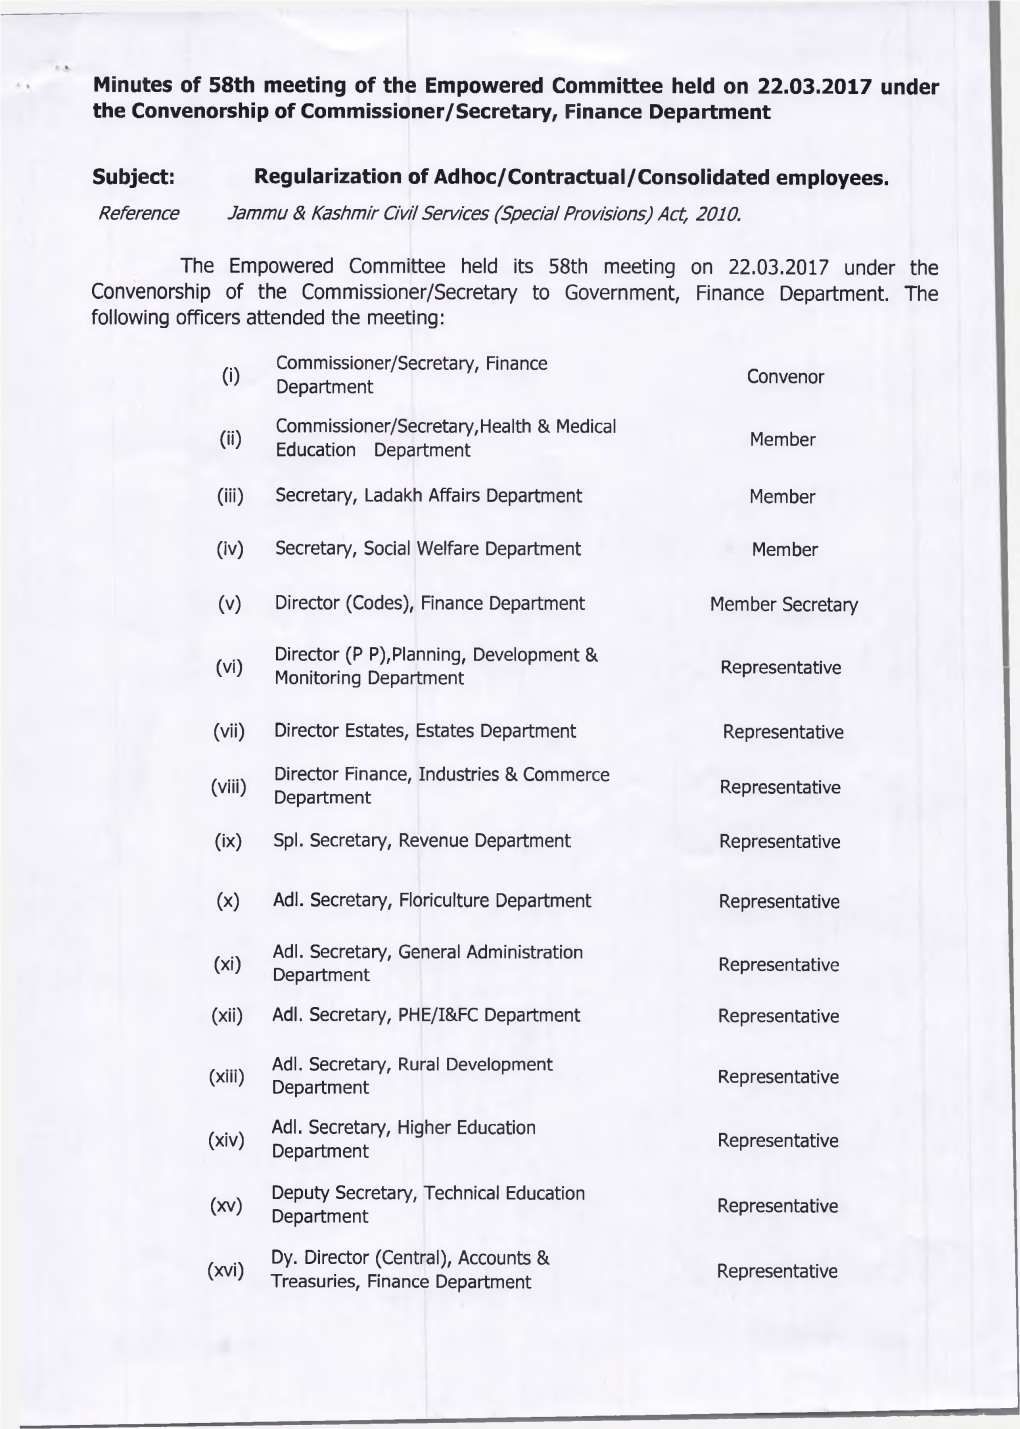 Minutes of 58Th Meeting of Empowered Committee Dated 22.03